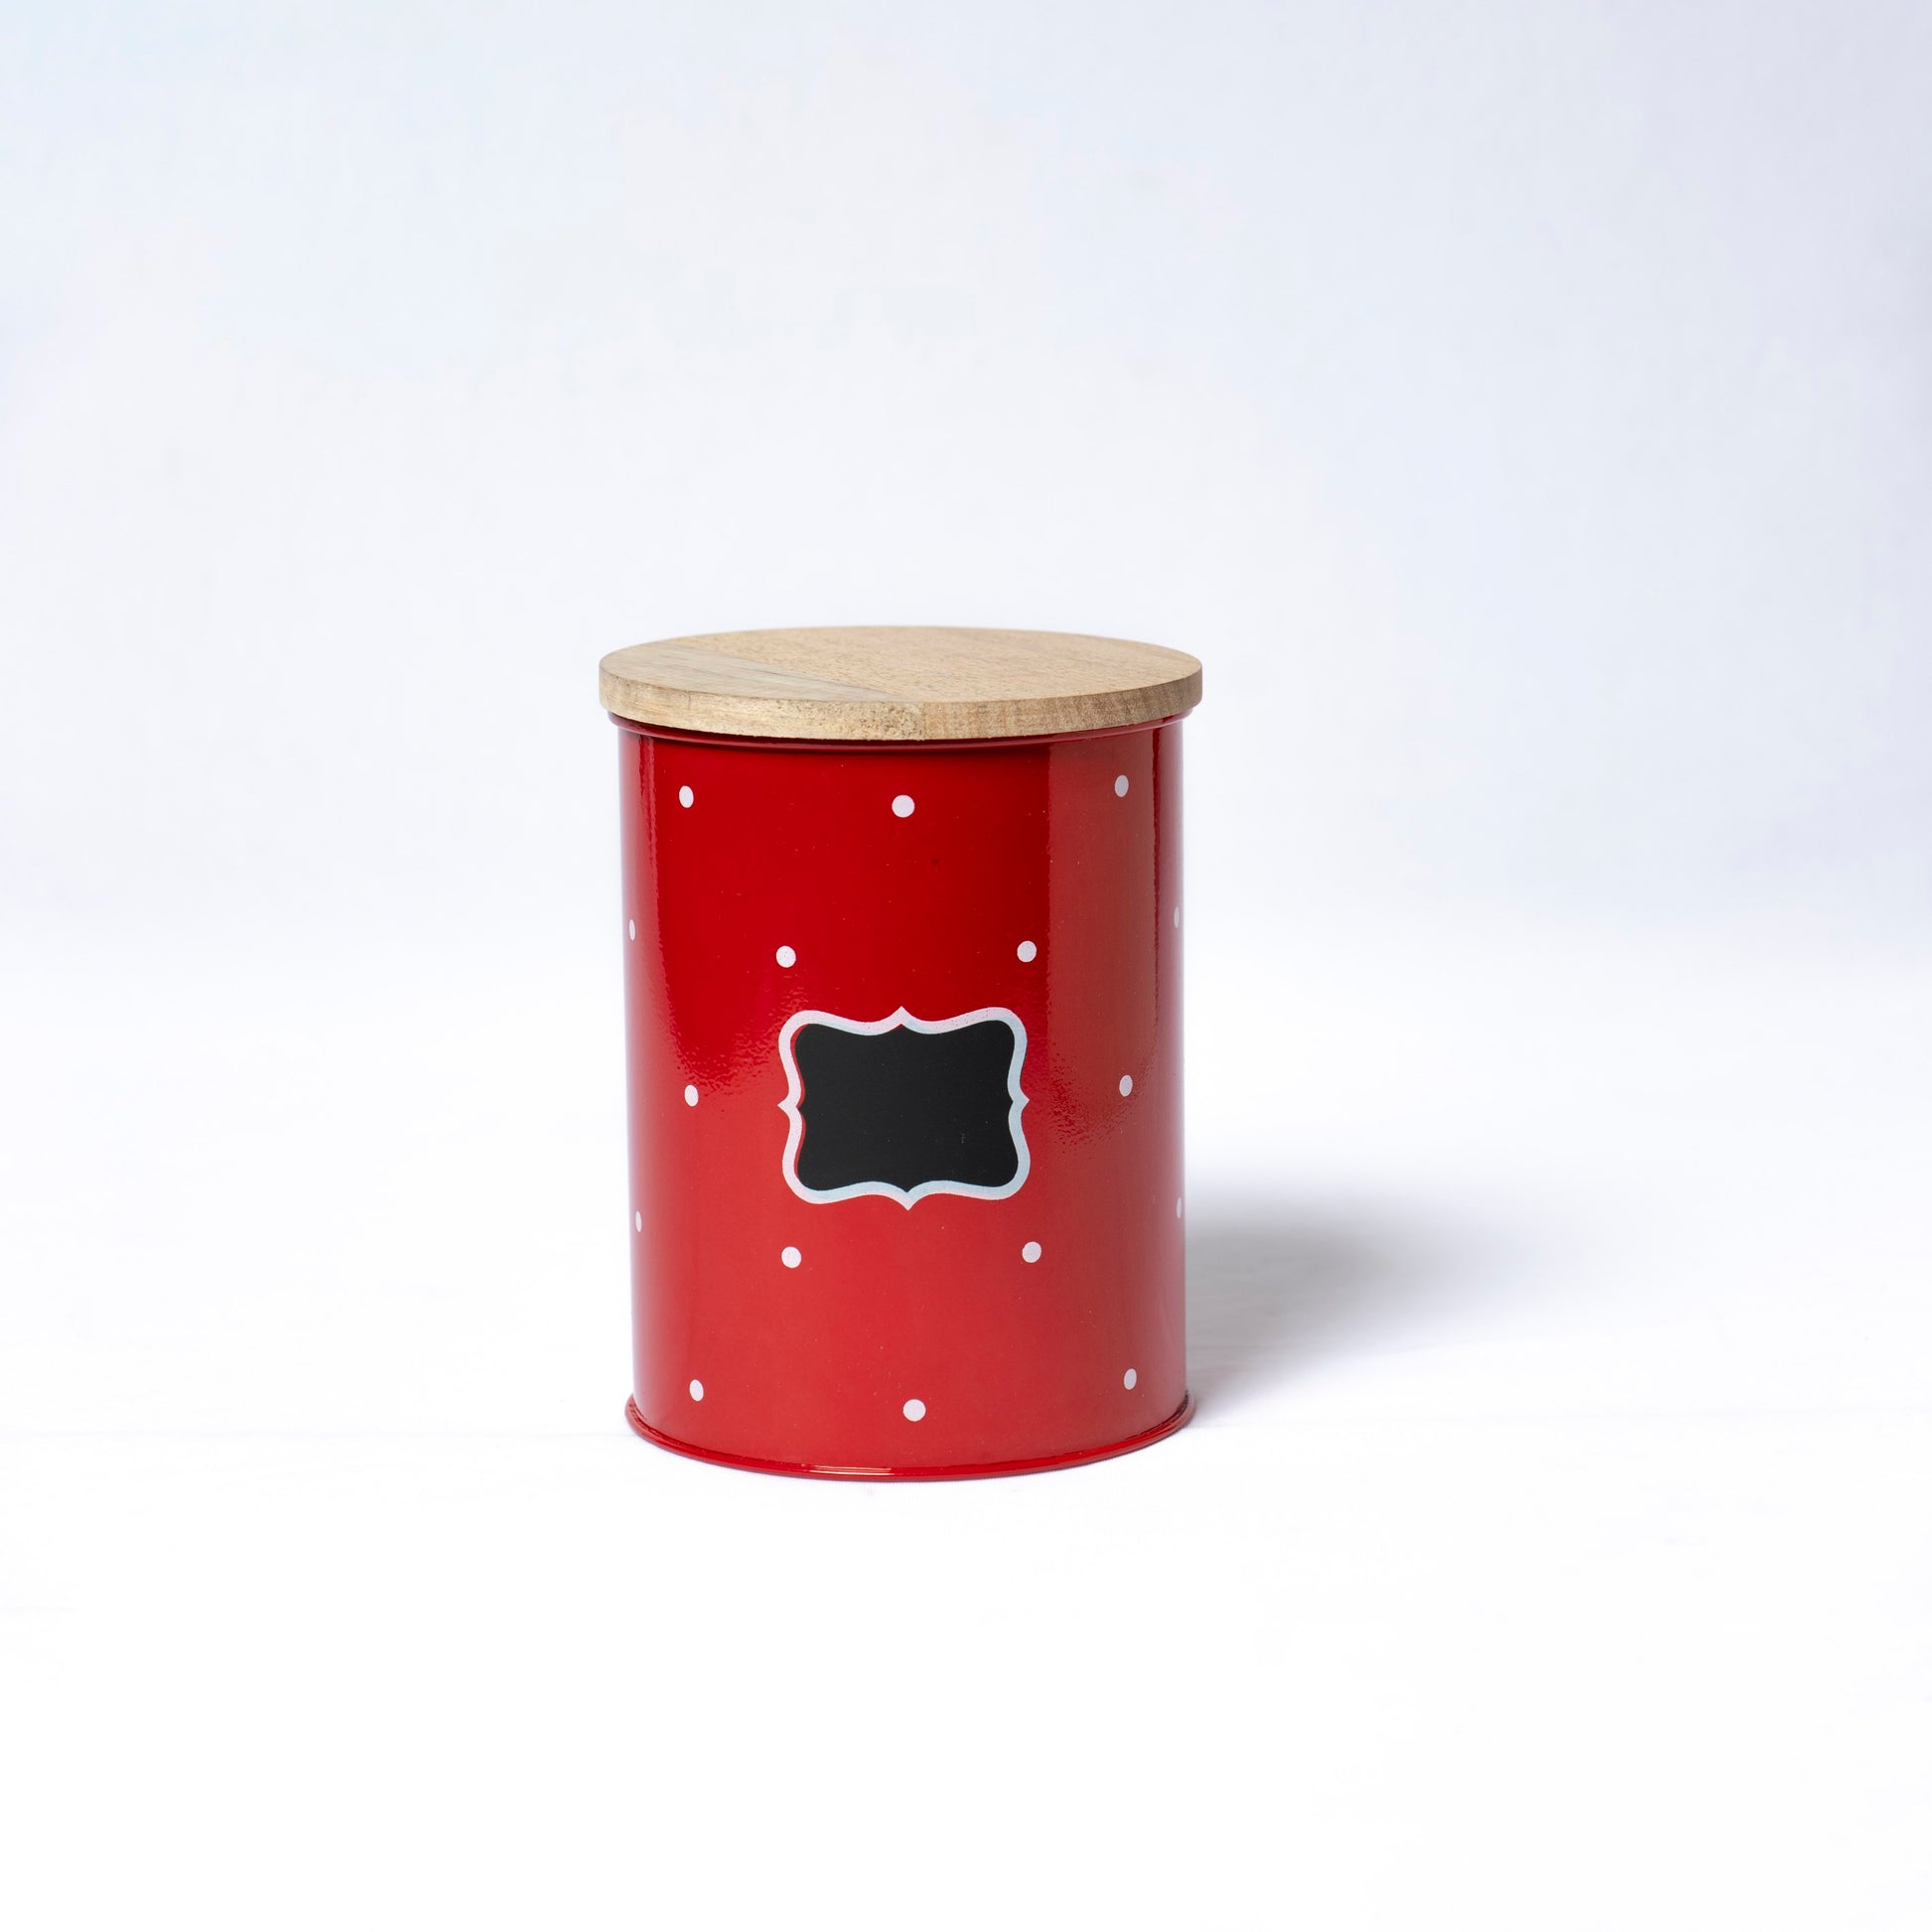 Polka Dot Design Steel Storage Container with Wooden Lid (Red) - SCST0004 - View 1